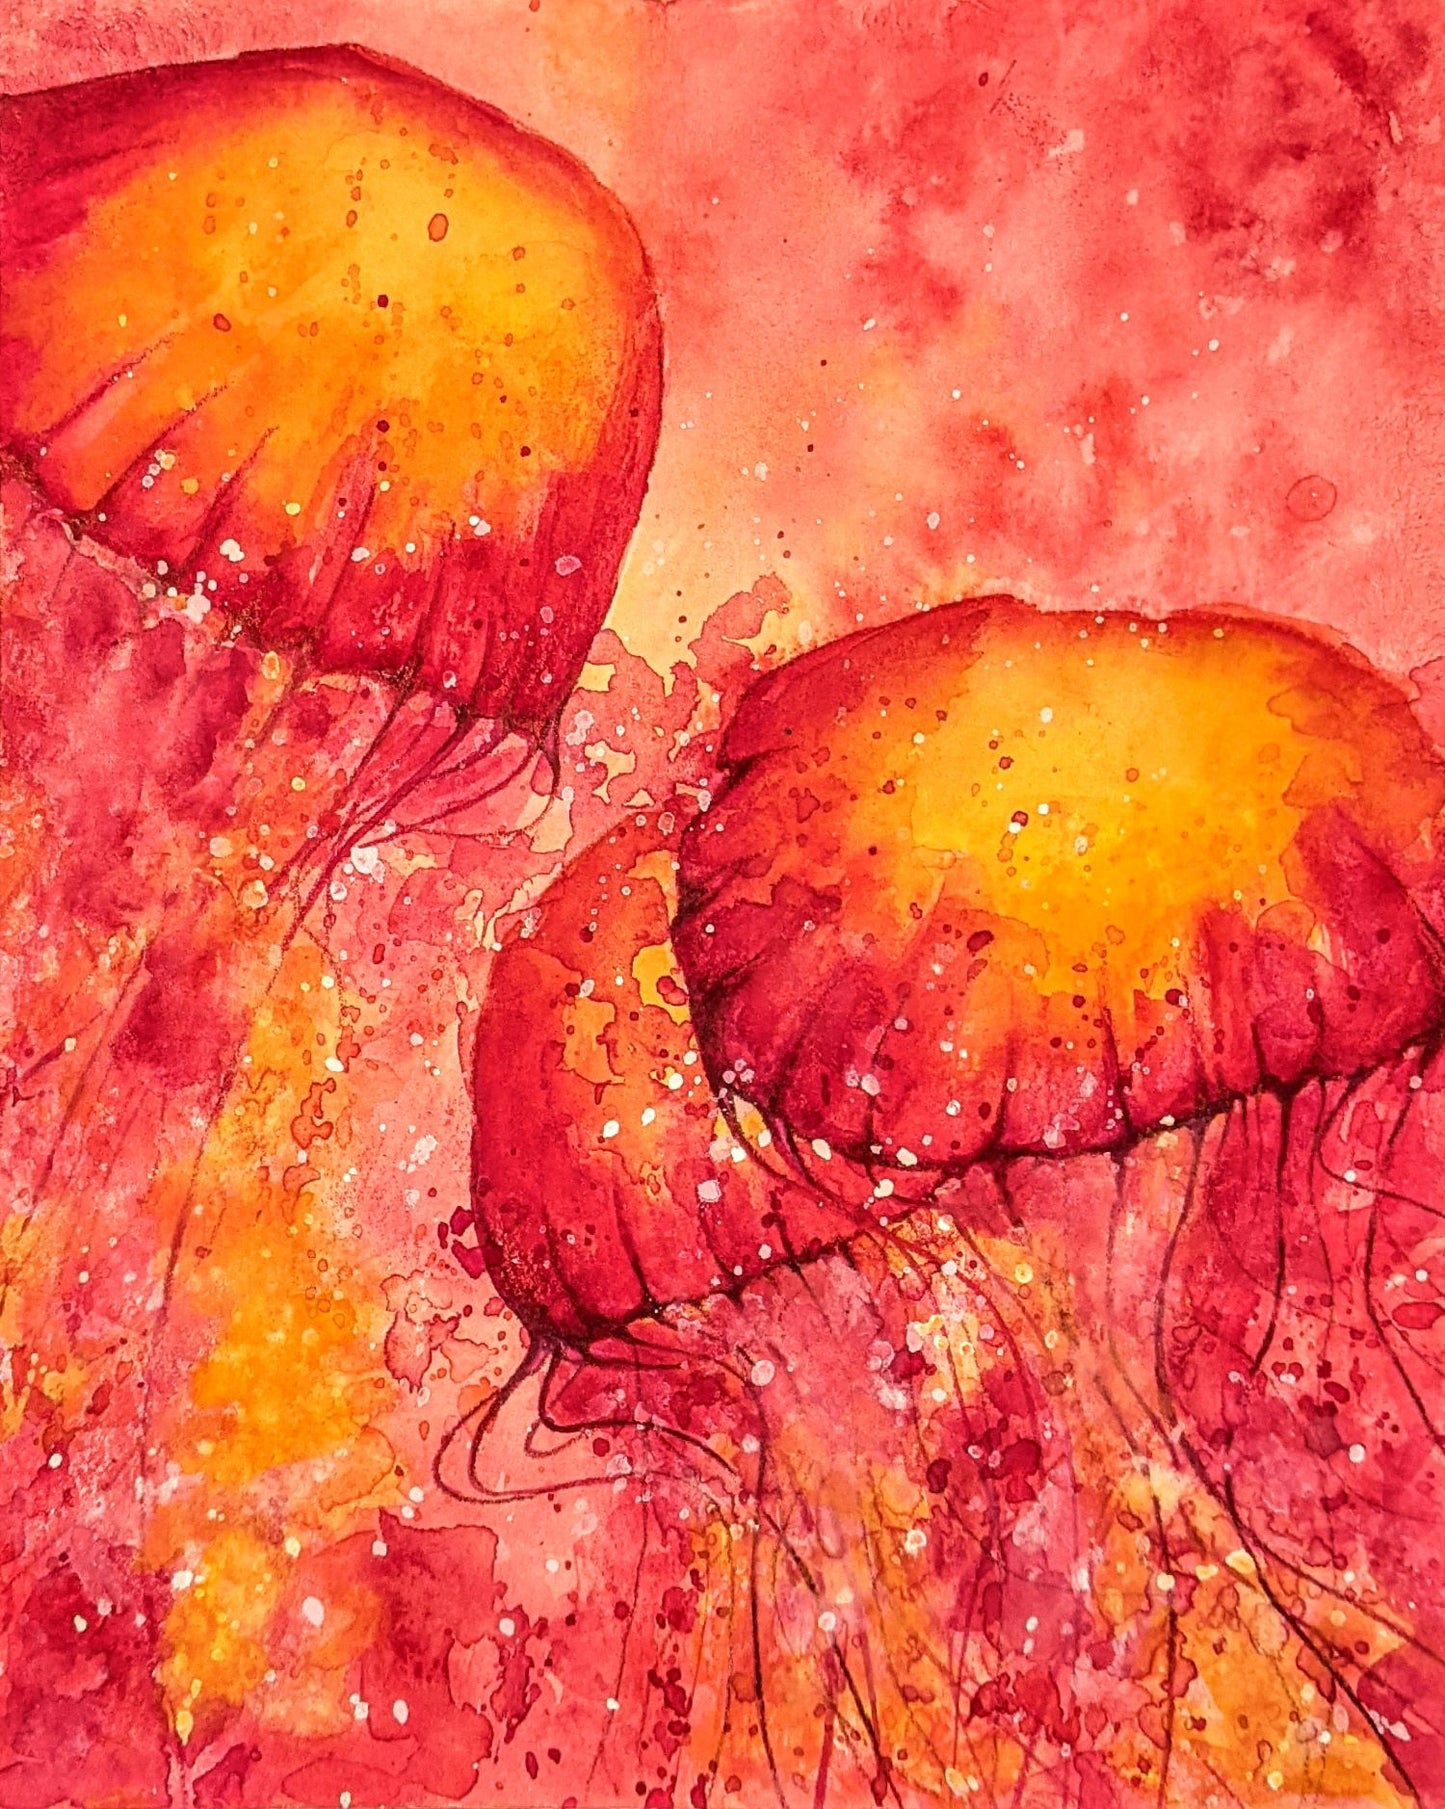 Coral Jellyfish watercolor painting on paper